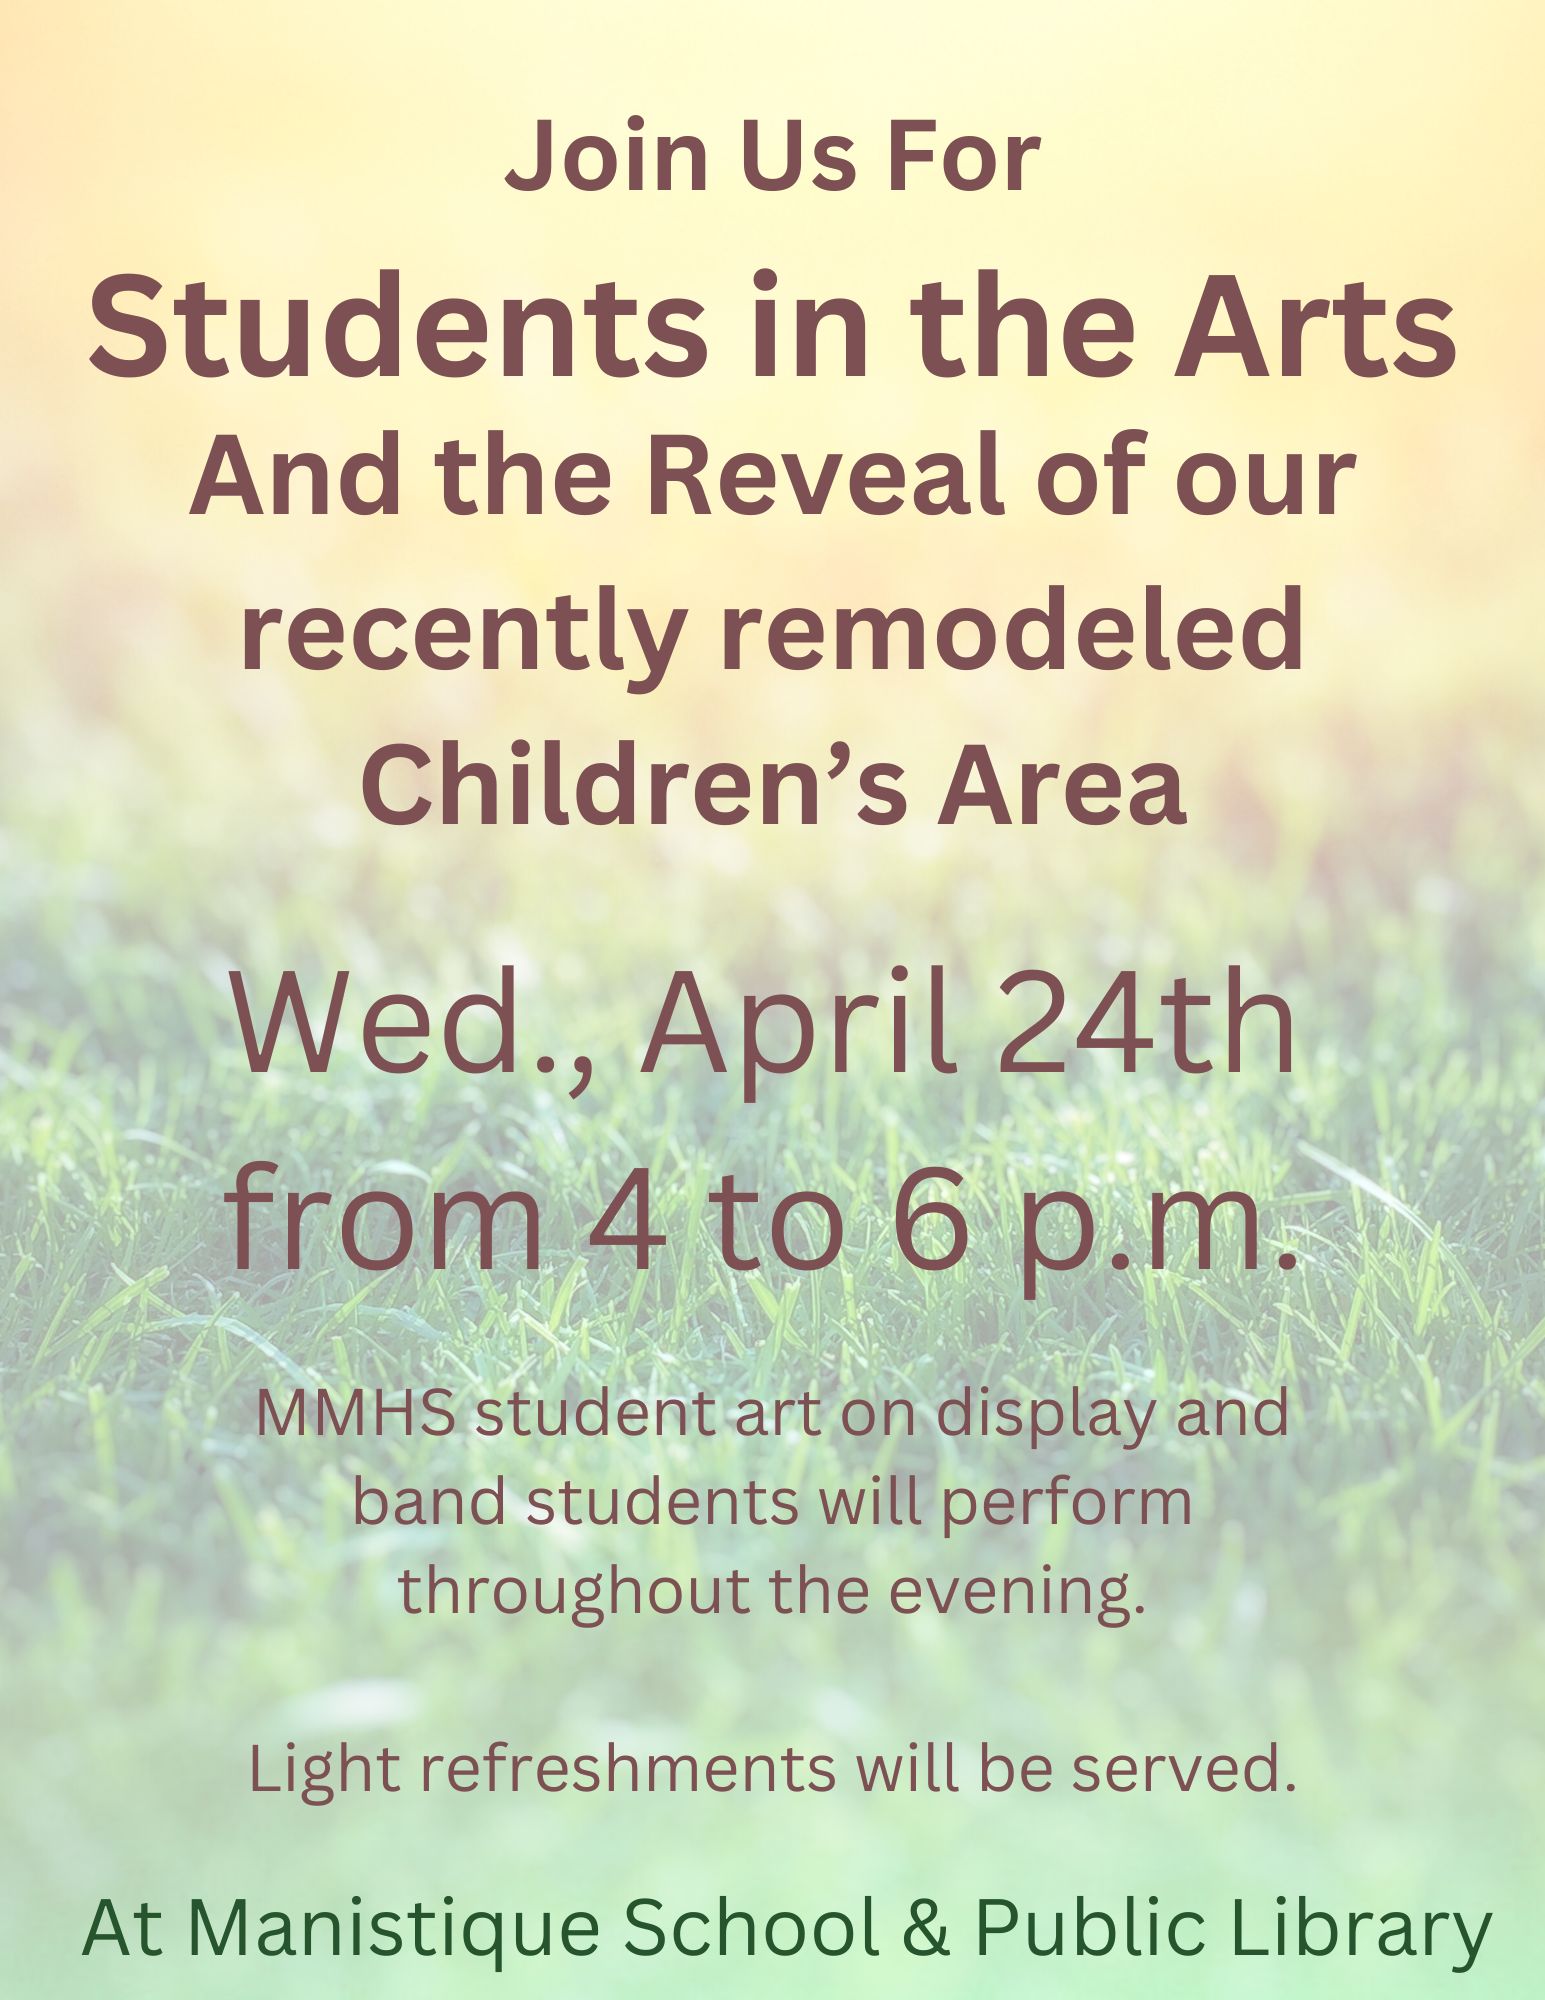 Join us for Students in the Arts and the Reveal of our recently remodeled Children's Area. Wednesday, April 24th from 4 to 6 PM. MMHS Studen art on display and band students will perform throughout the evening. Light refreshments will be served at Manistique School & Public Library.